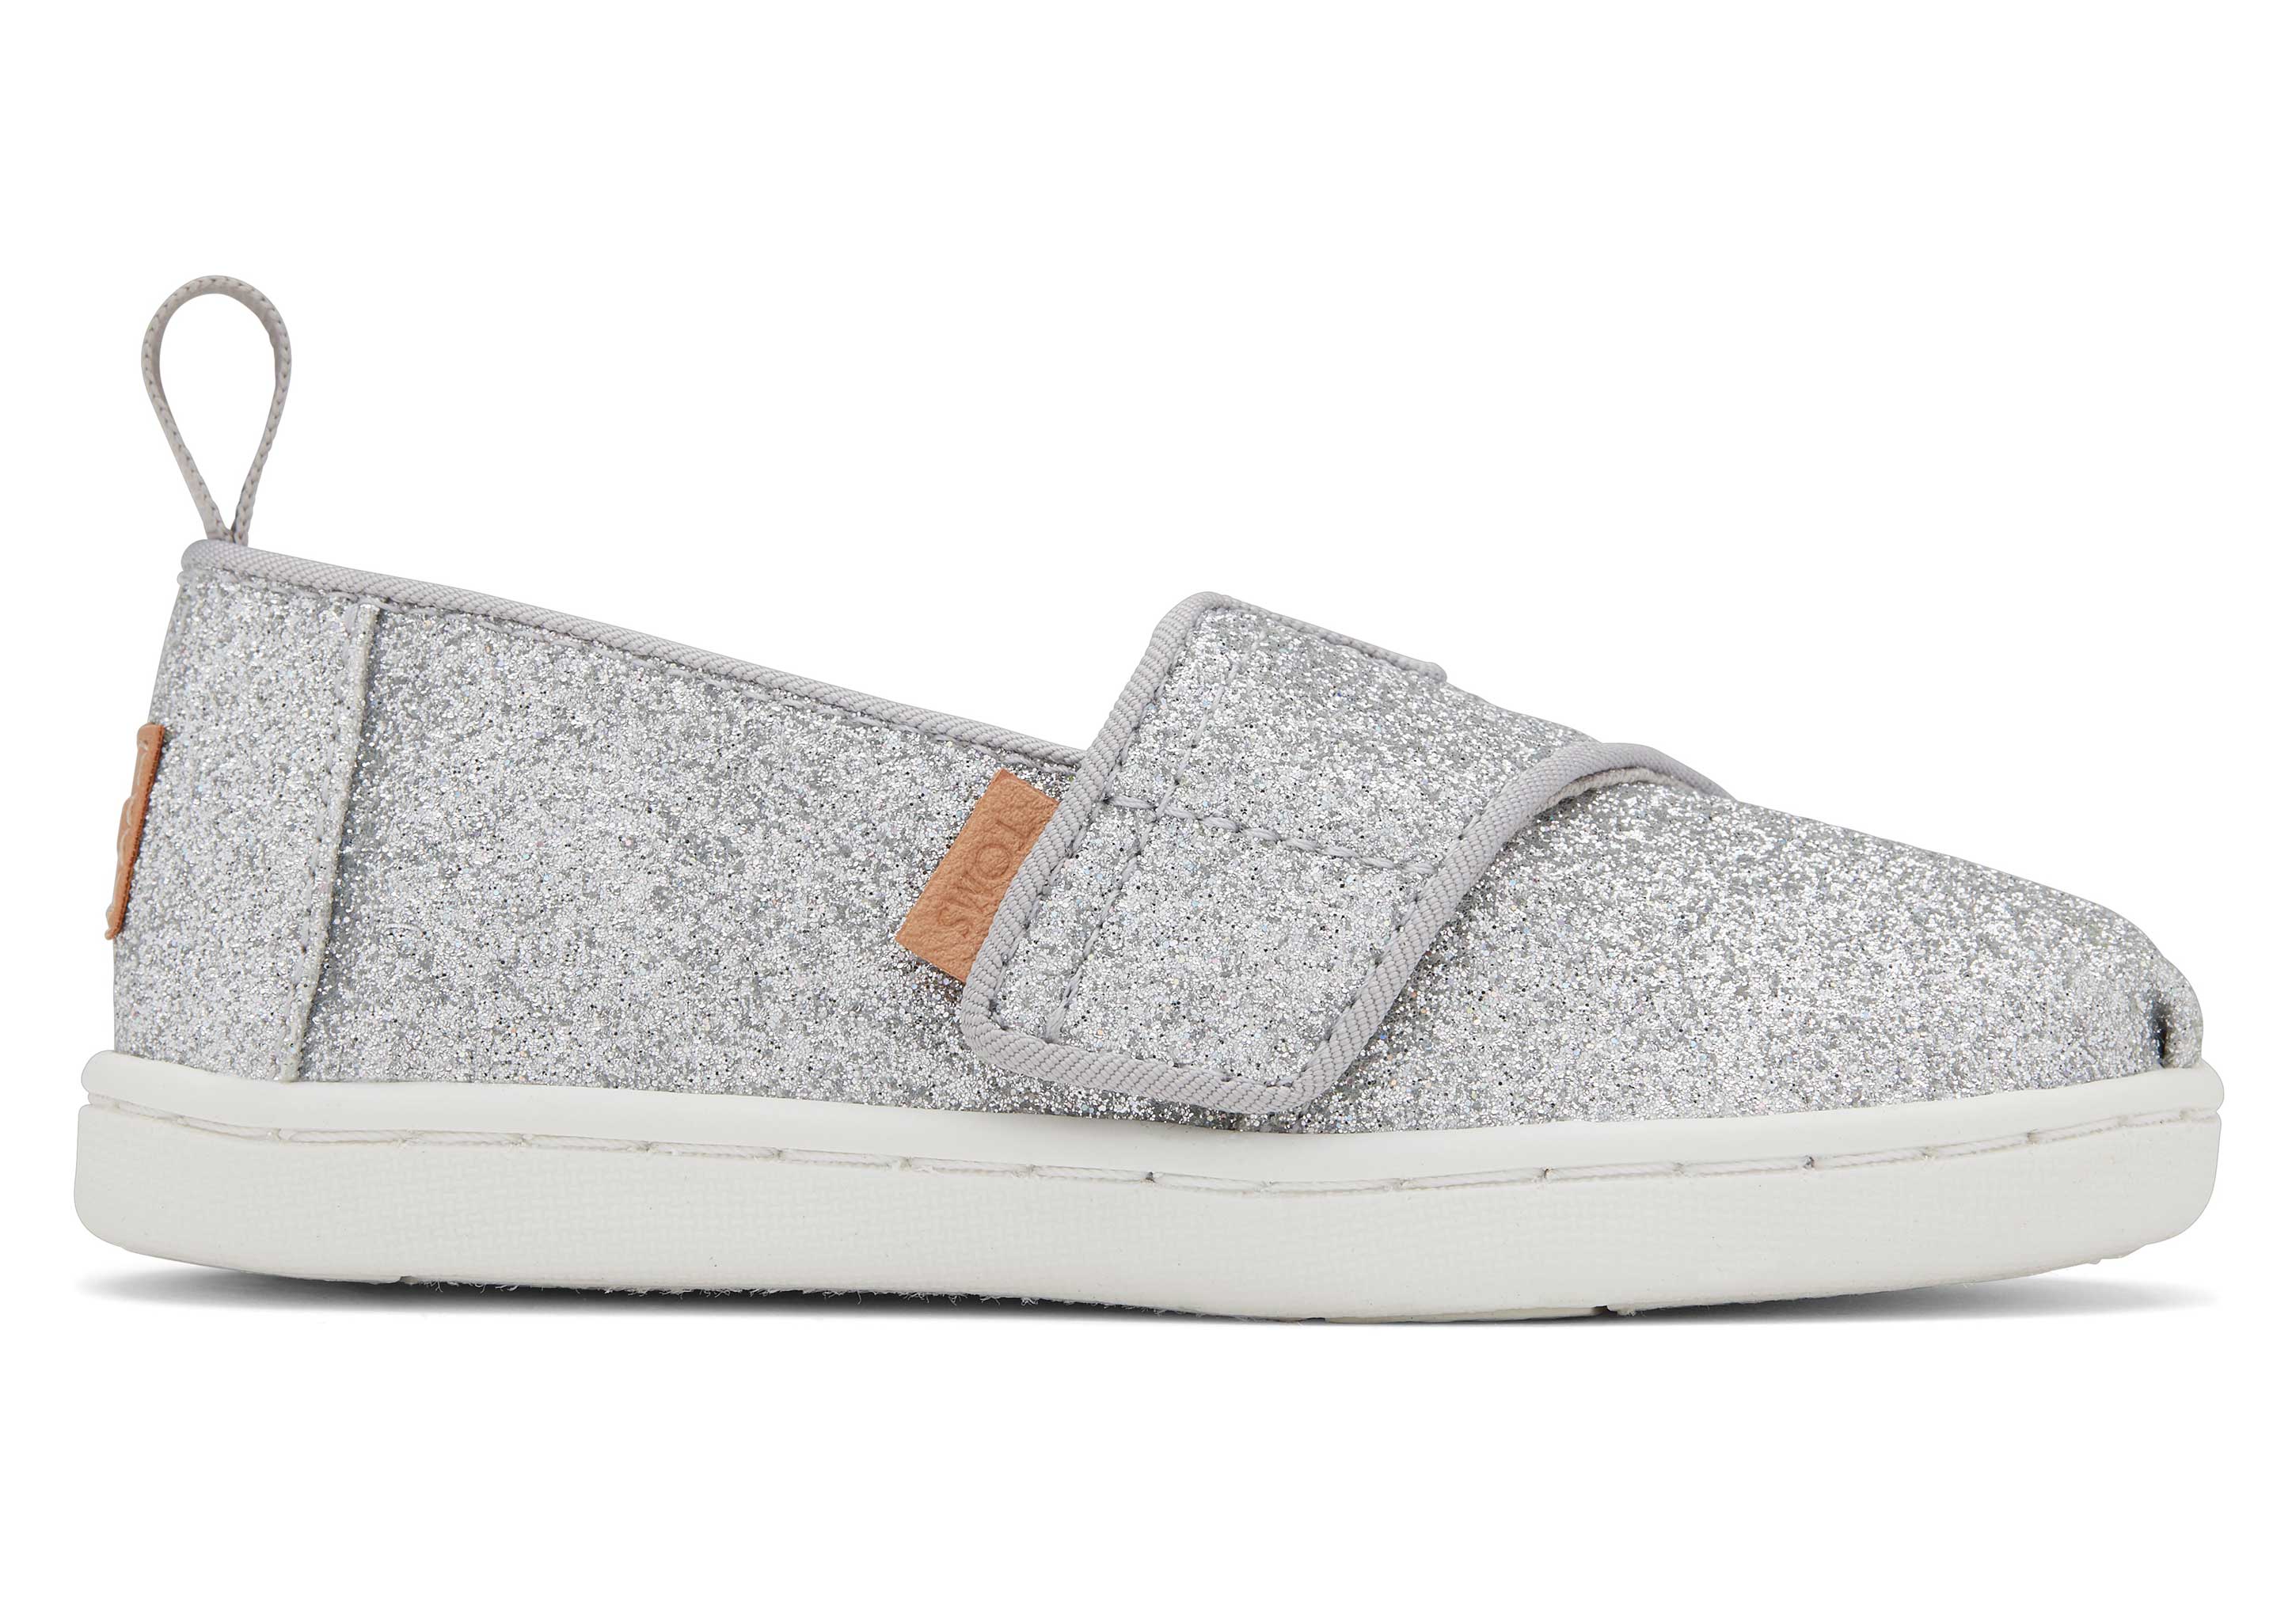 sparkly toms for toddlers